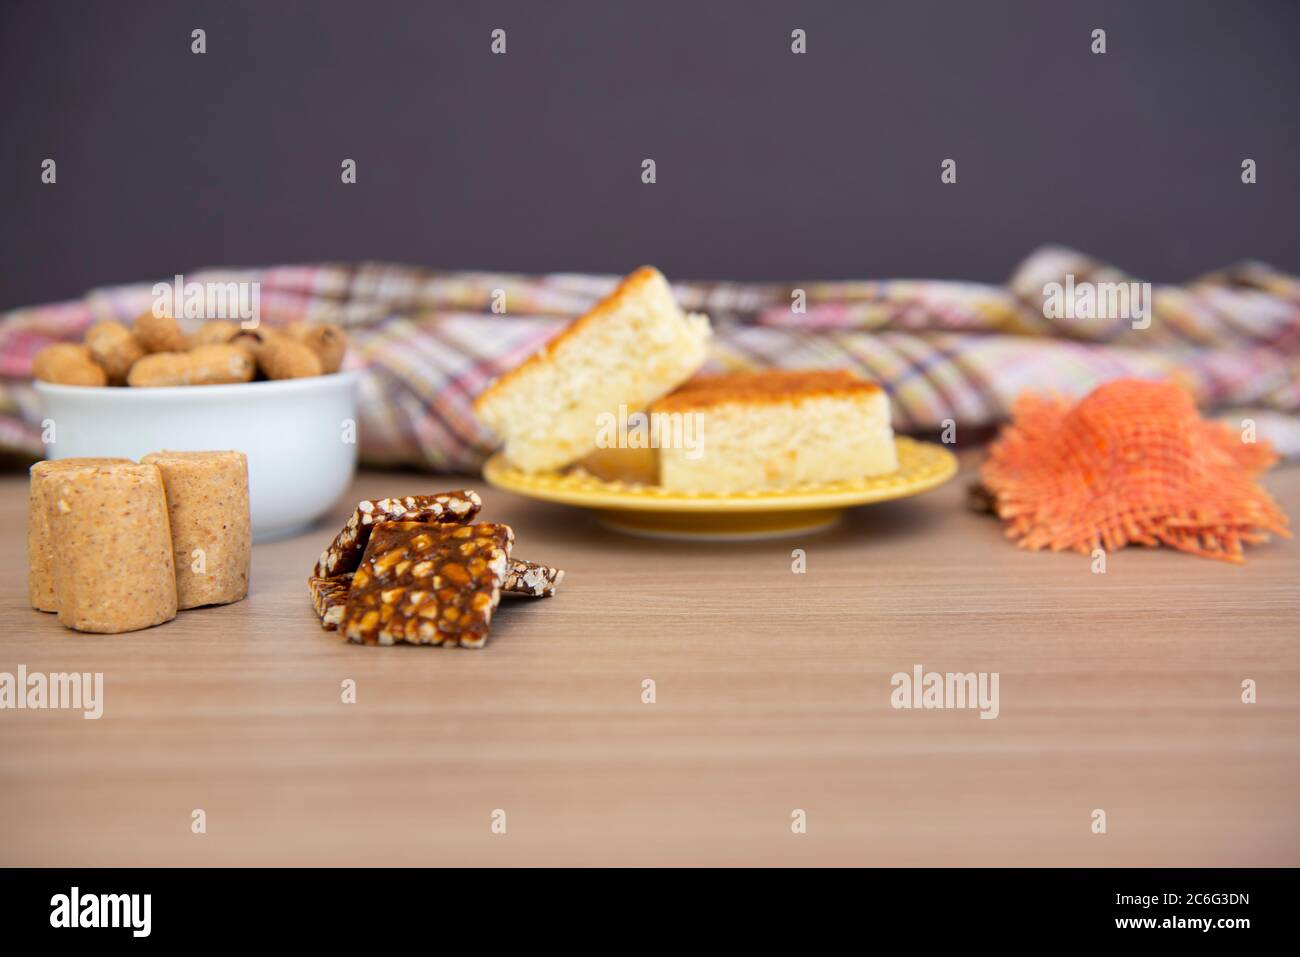 Typical June Party foods on a wooden table: cornmeal cake, peanut pods, peanuts candies (paçoca and pe-de-moloque) and a small country hats. Copy spac Stock Photo